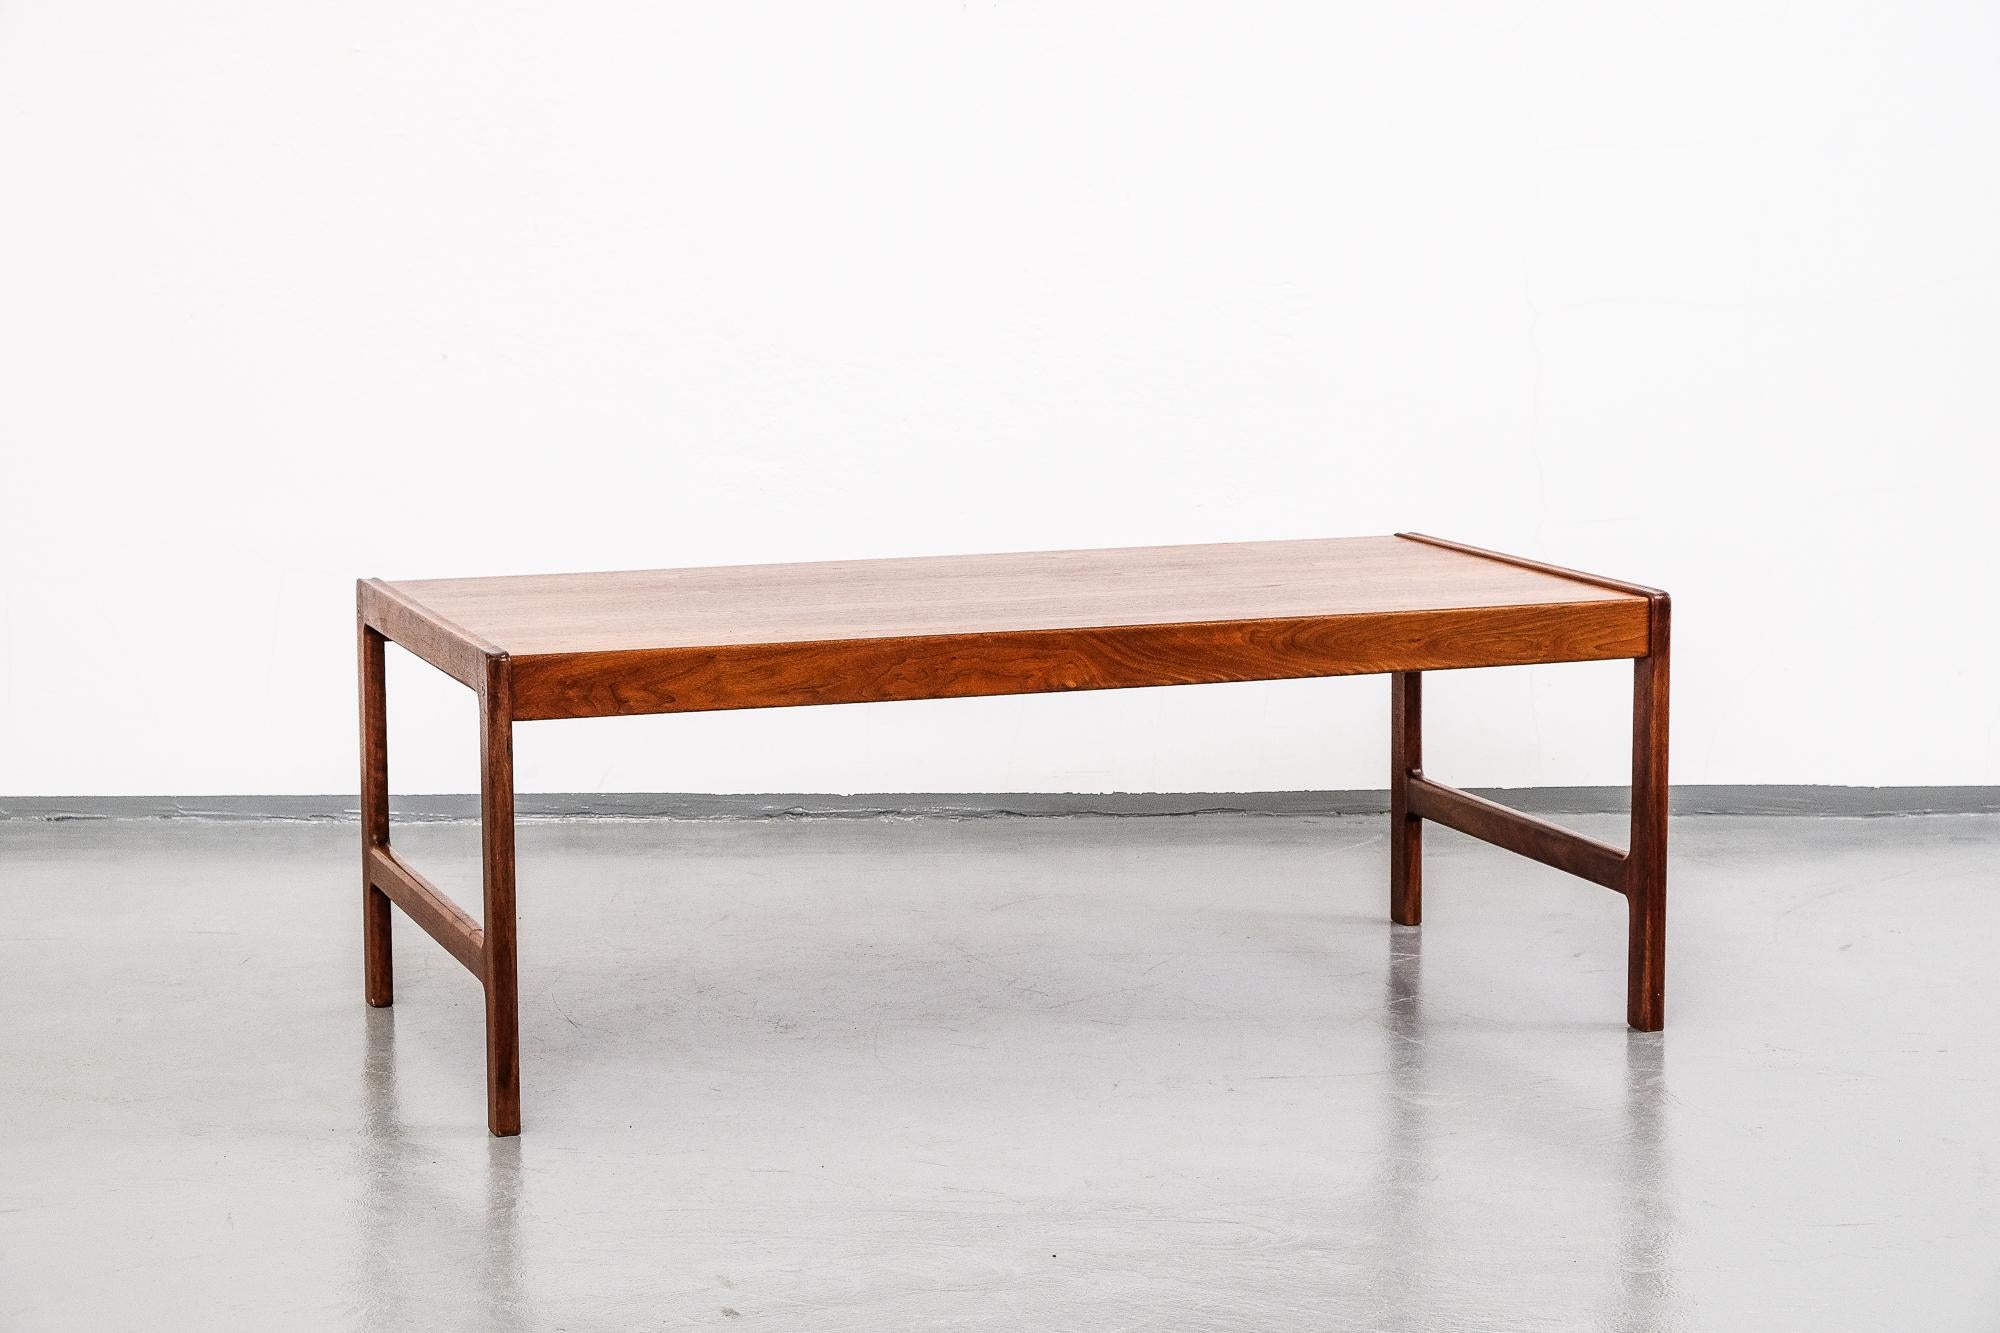 Big midcentury teak coffee table by Folke Ohlsson for Tingströms, Sweden, makers mark stamped underneath. Beautifully crafted and excellent vintage condition.

Legs will be dismounted for shipping.